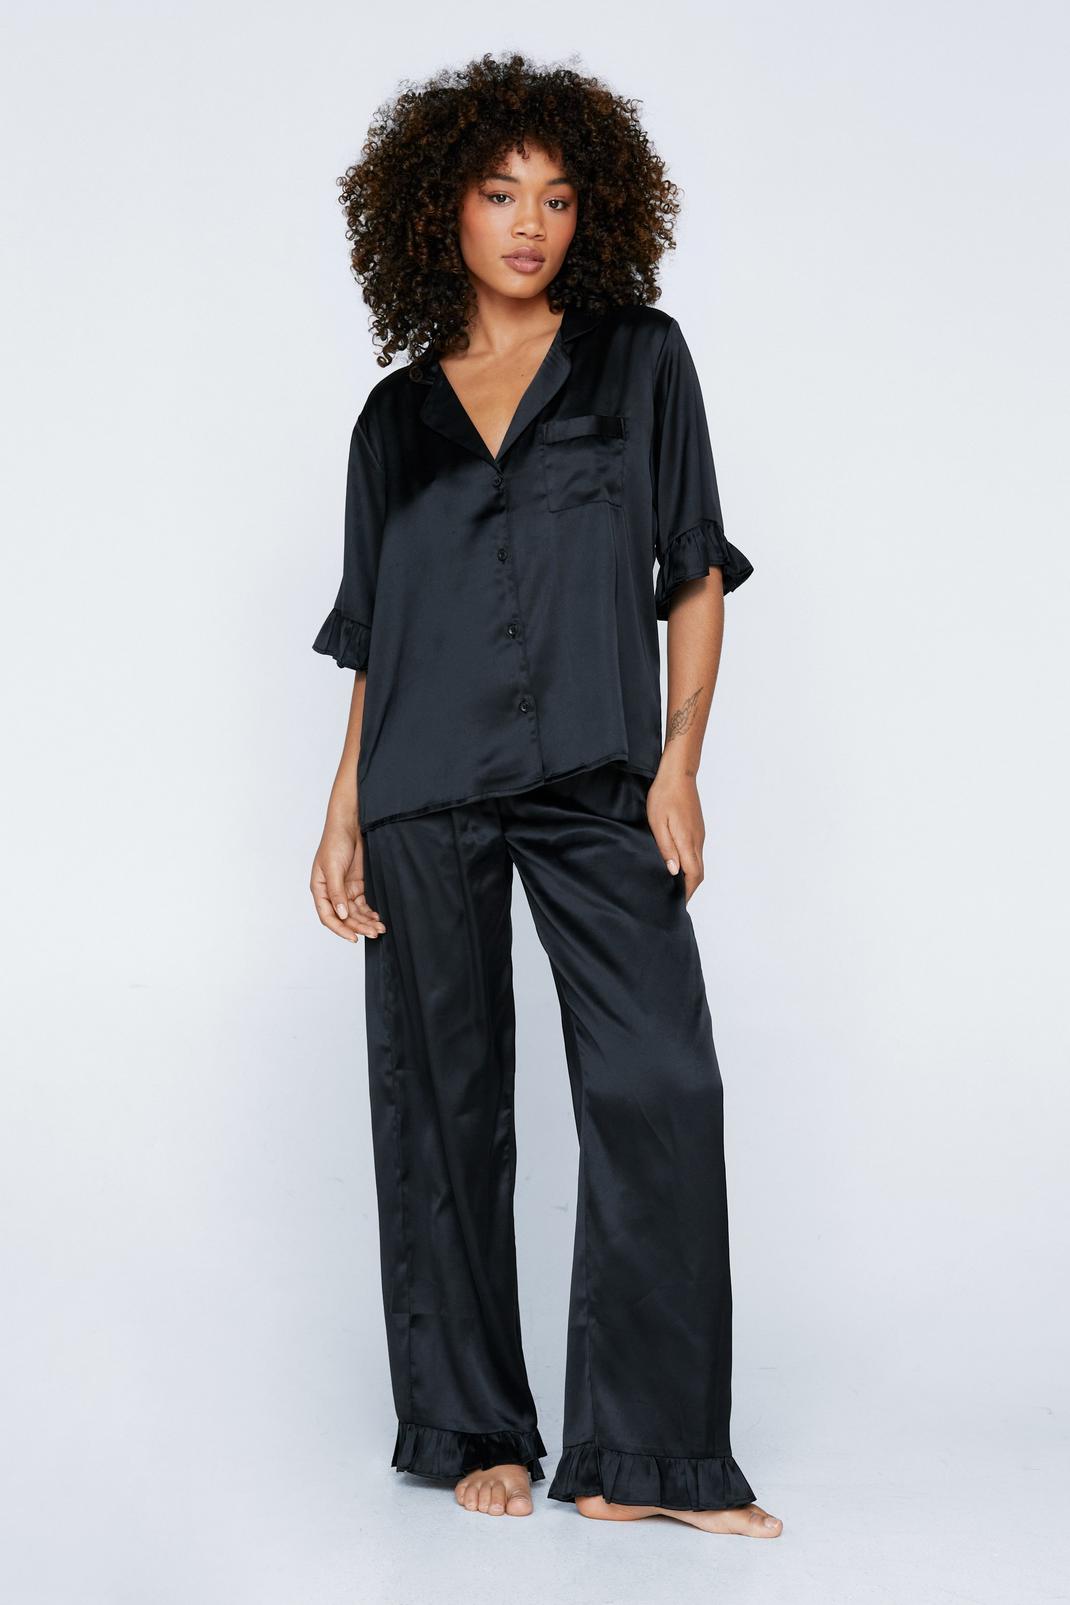 Buy Lazy One Pajamas for Women, Cute Pajama Pants and Top Set